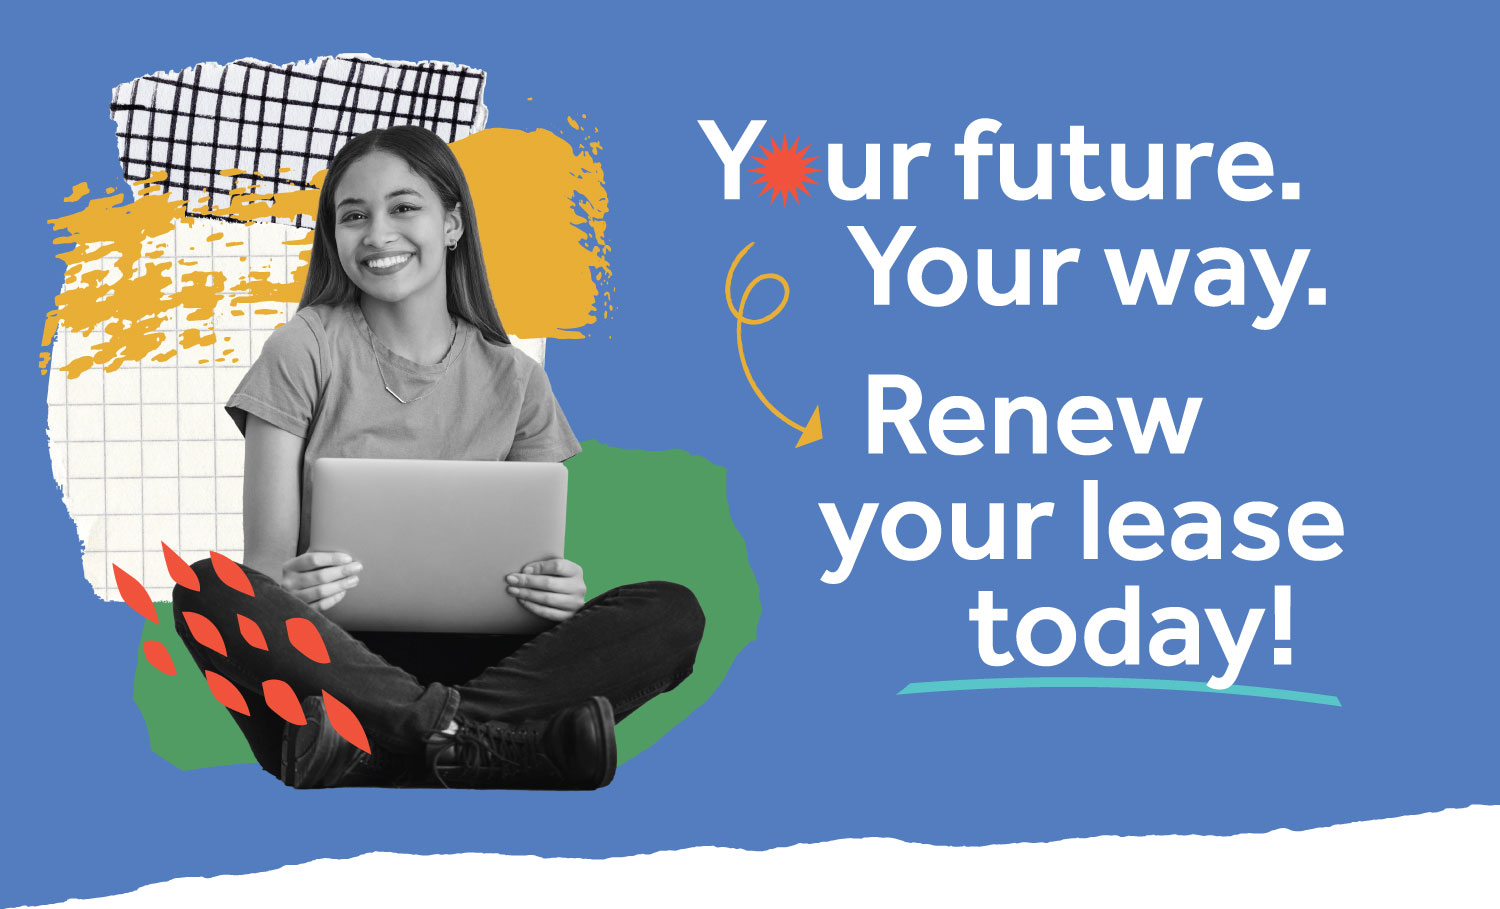 Your future. Your way. Renew your lease today!